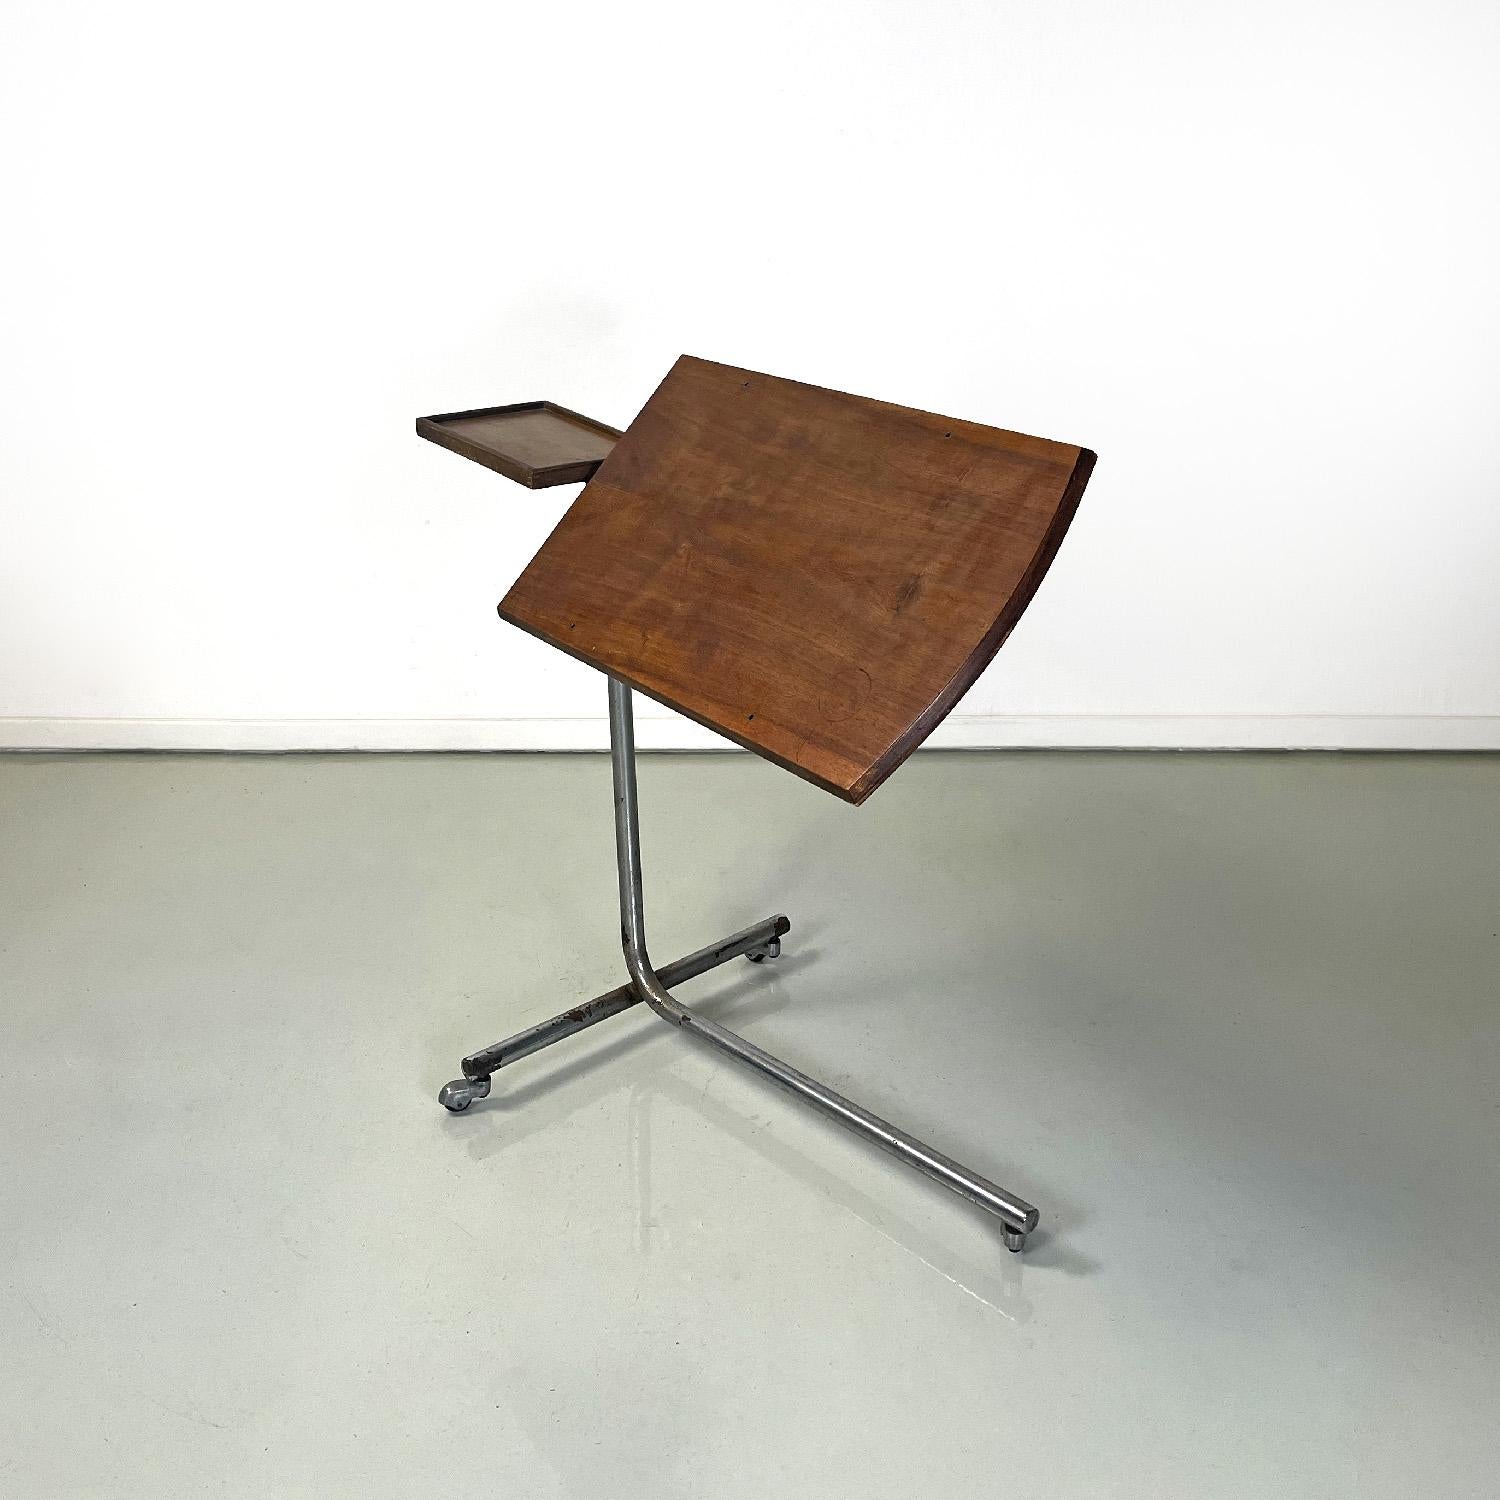 Italian mid-century modern wood and metal industrial work table, 1960s For Sale 2